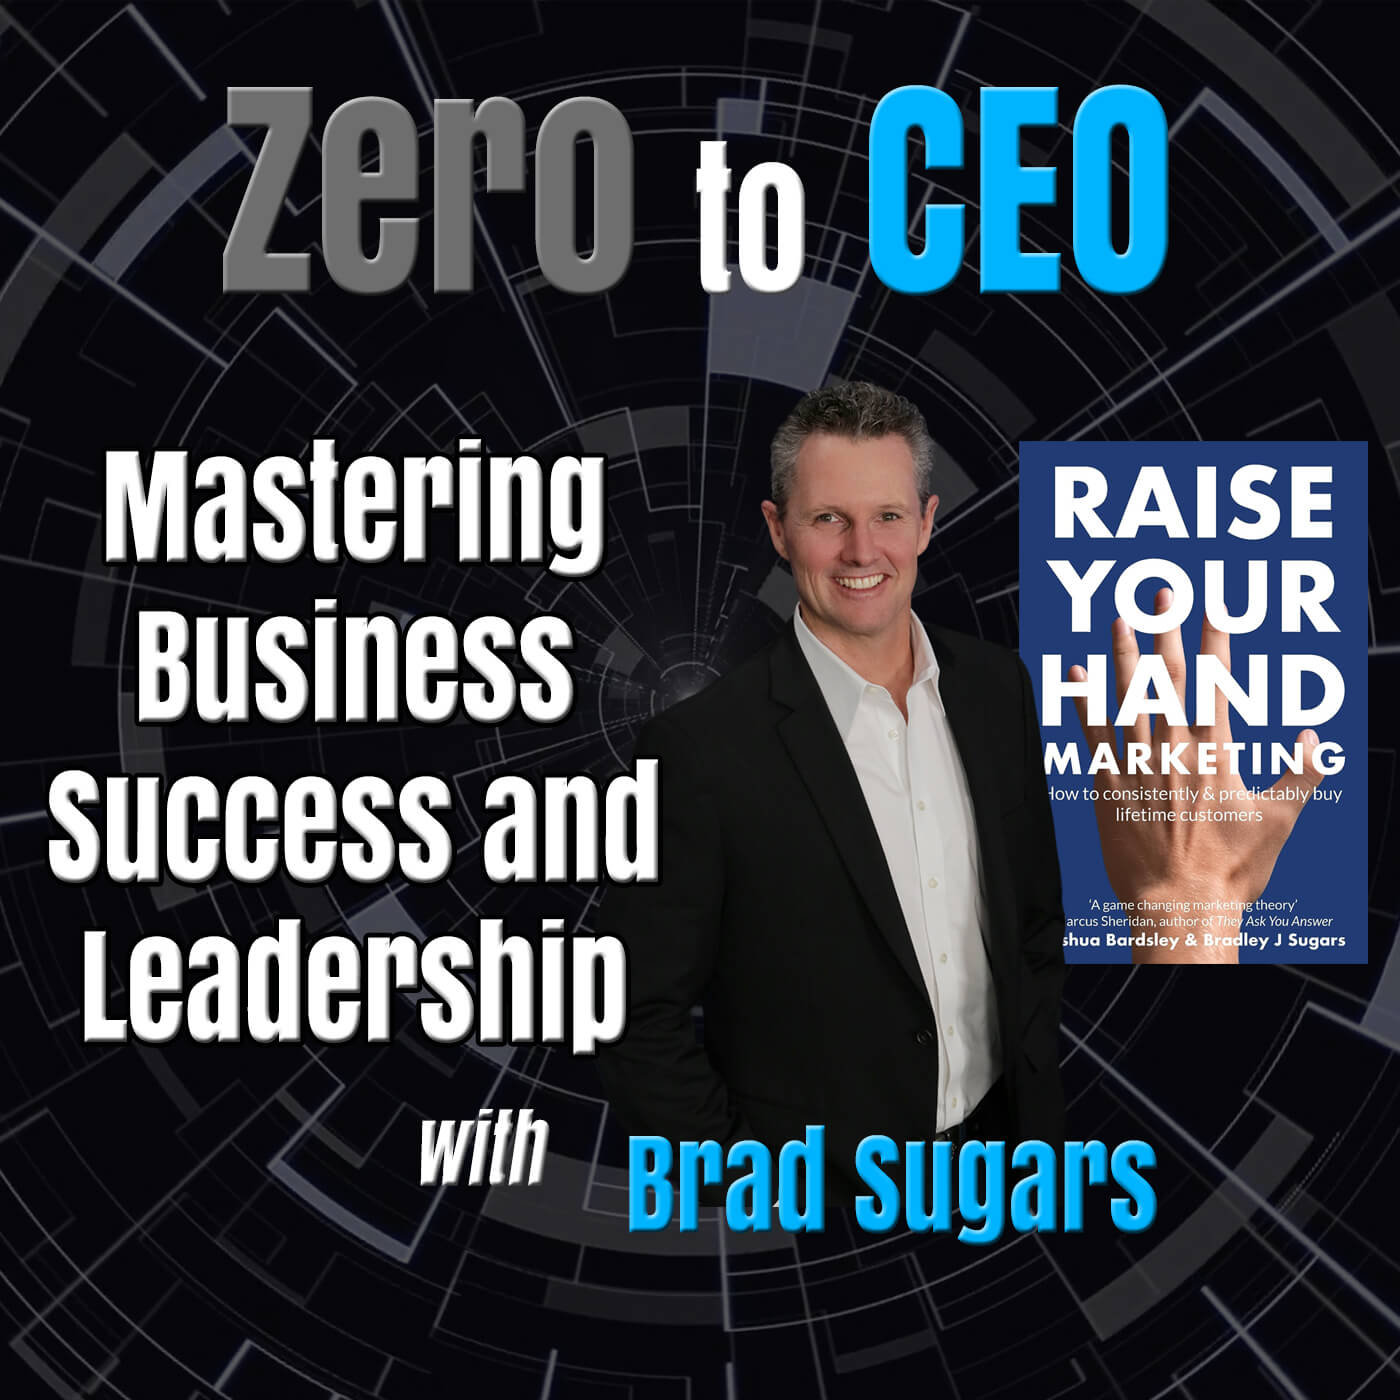 Zero to CEO: Mastering Business Success and Leadership with Brad Sugars